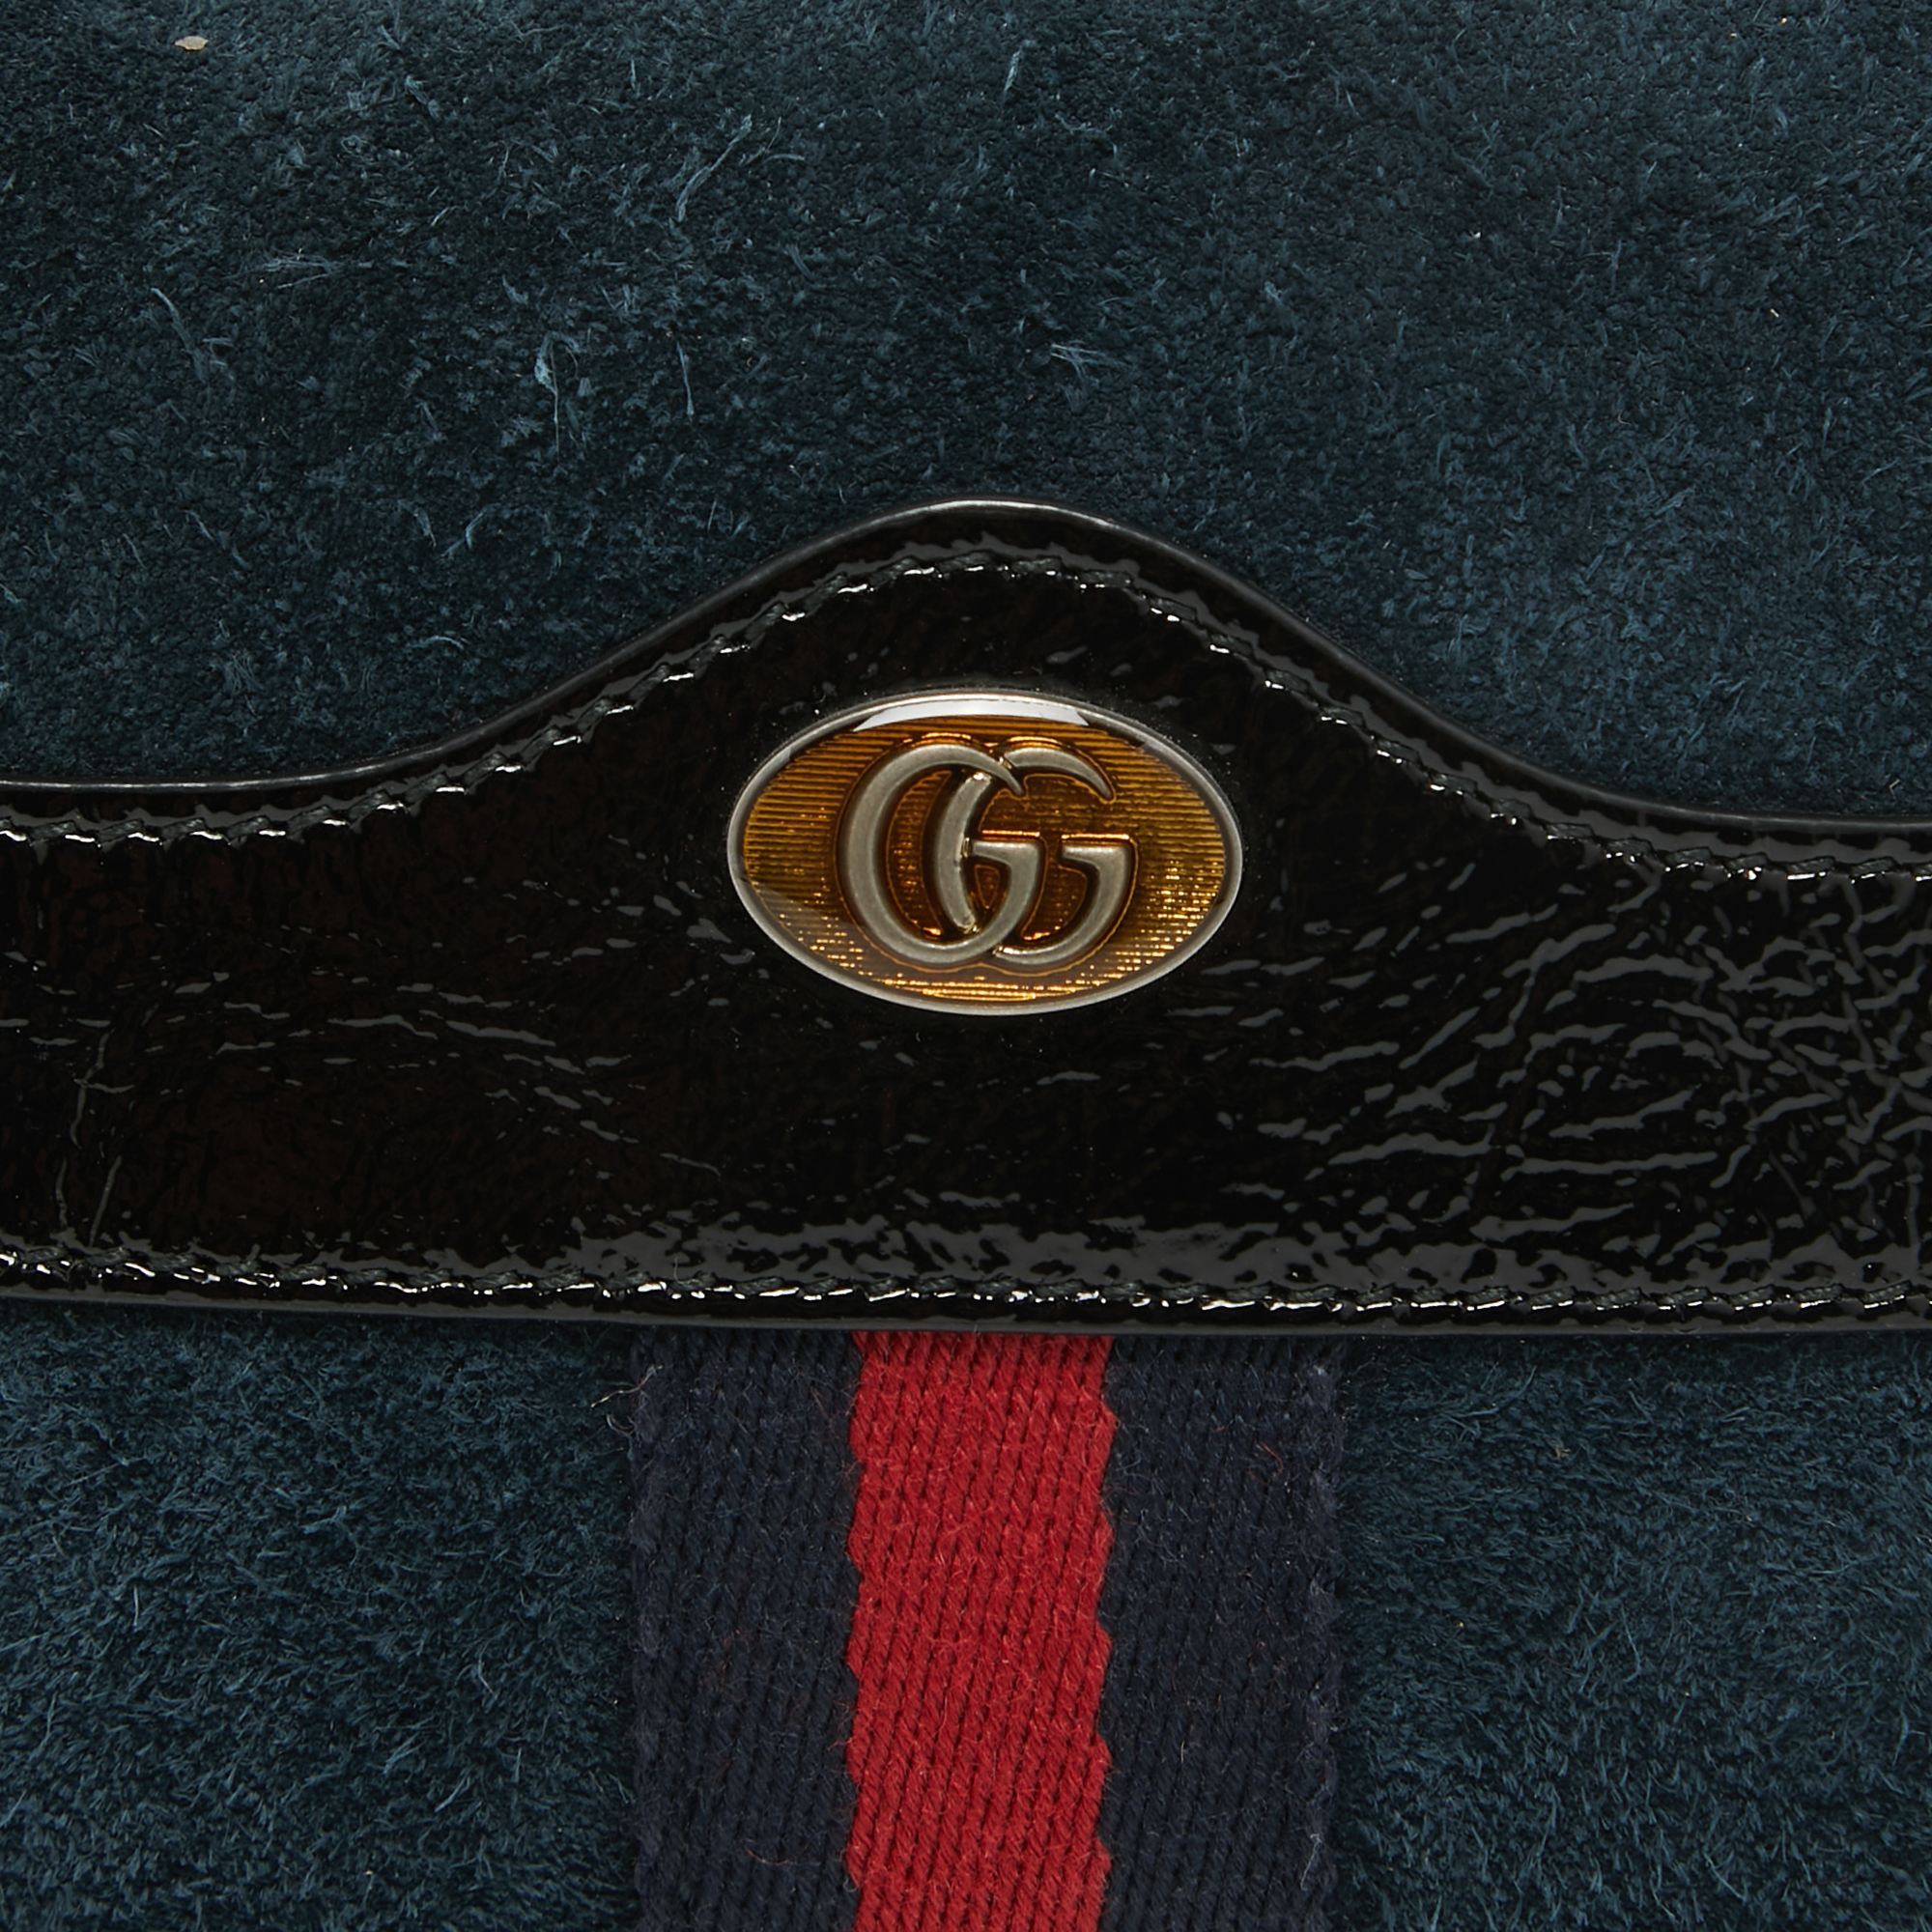 Gucci Black/Navy Blue Suede And Patent Leather Ophidia Belt Bag